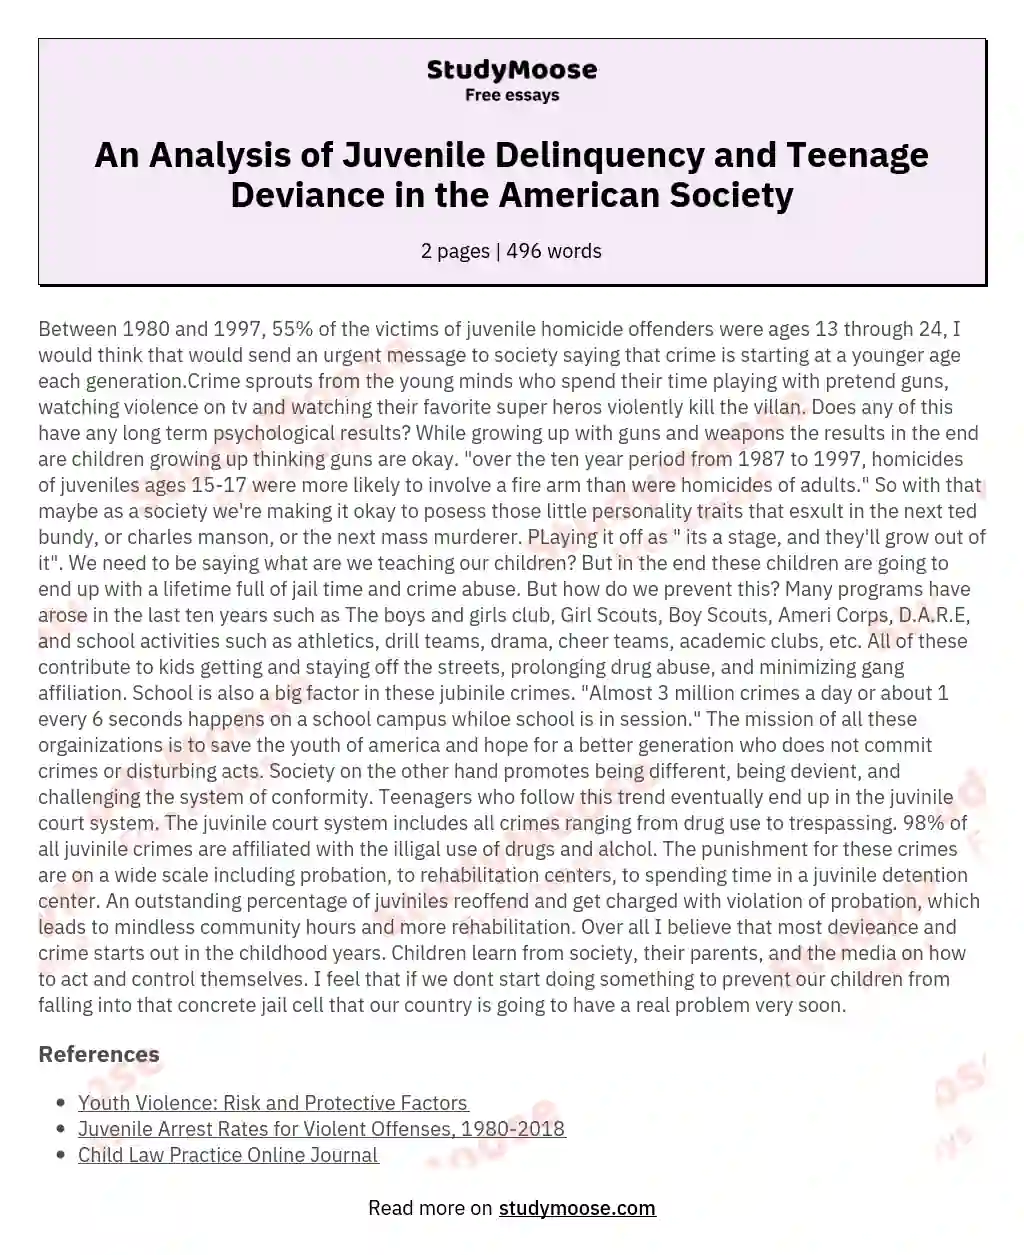 An Analysis of Juvenile Delinquency and Teenage Deviance in the American Society essay